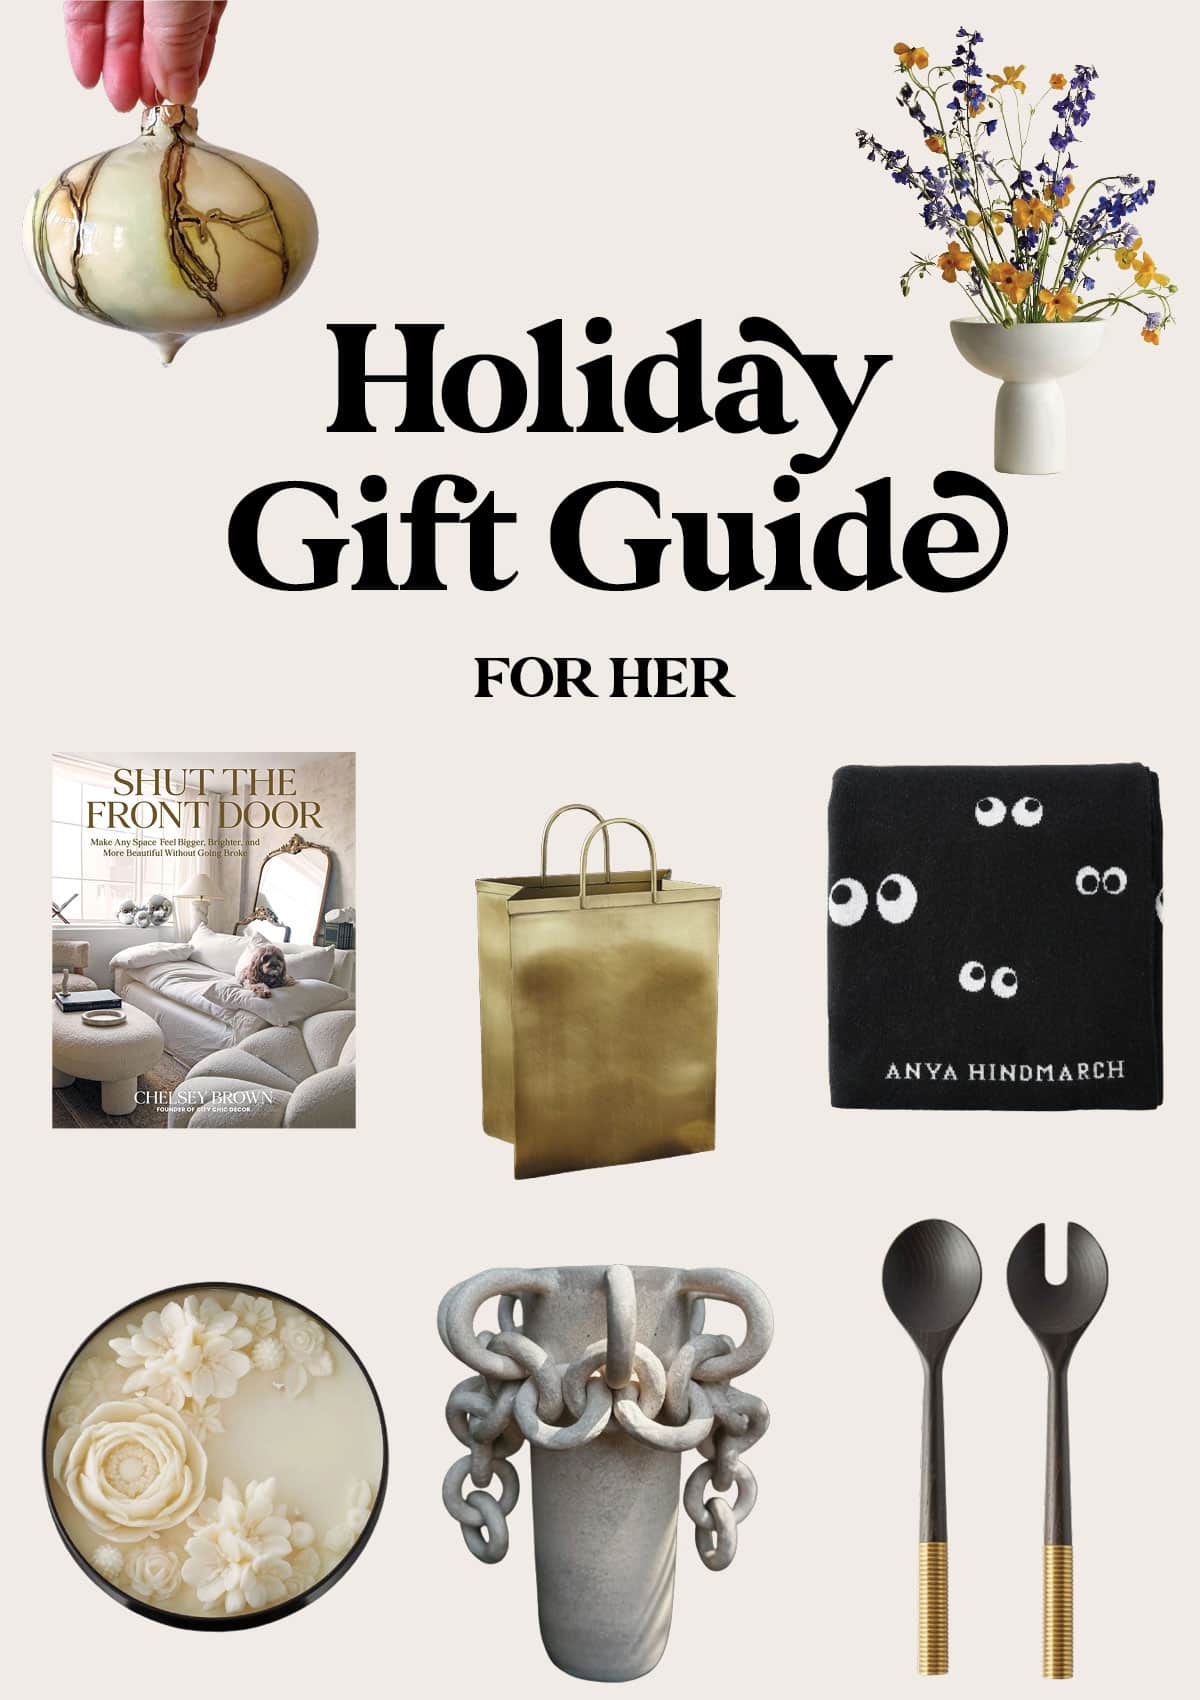 Best Gift Ideas For Women - Unique Holiday Gift Guide 2023 - I searched the internet for the most unique home decor gifts for her and rounded up the best gift ideas for women.